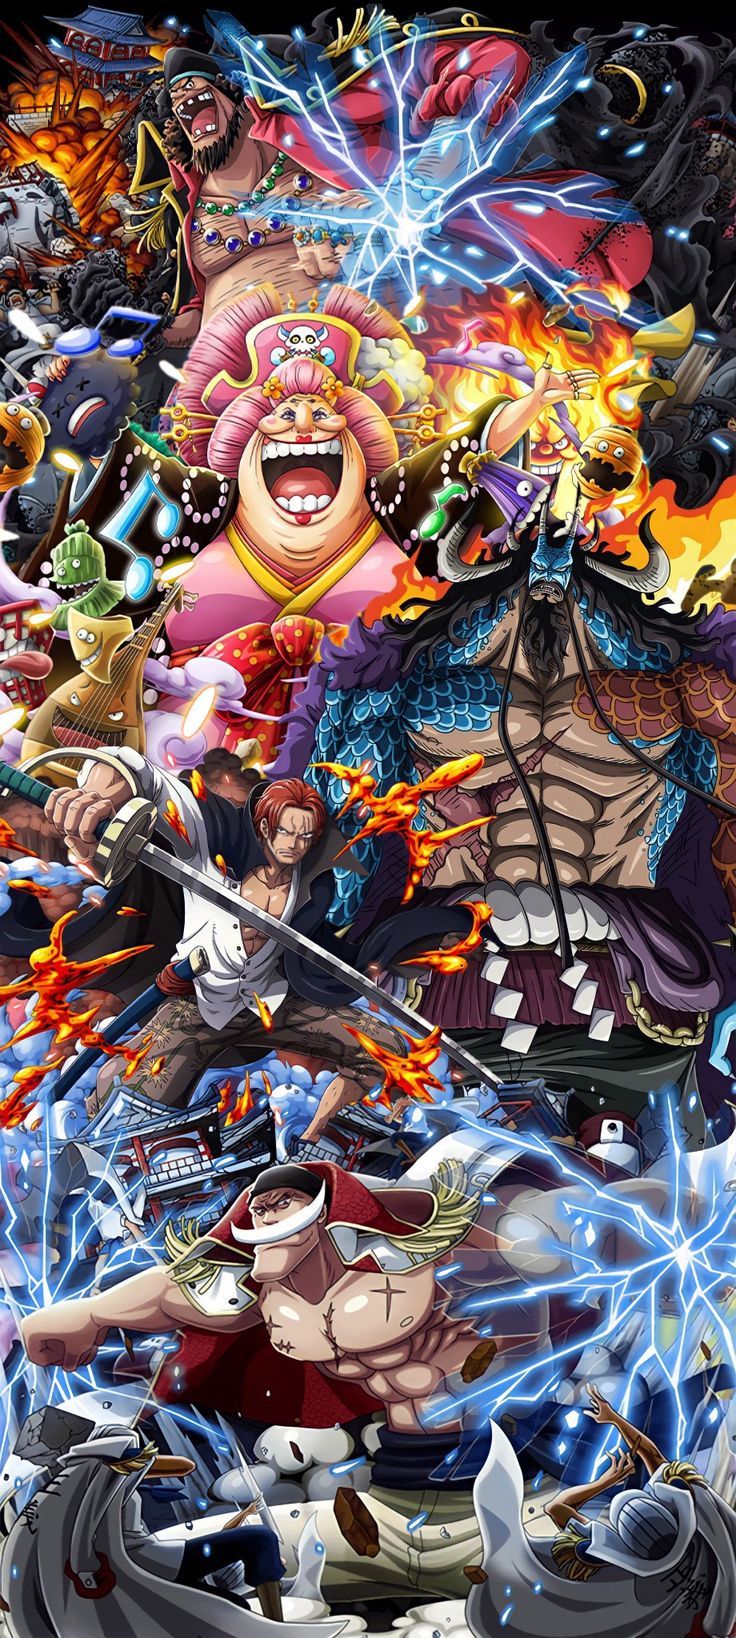 One Piece wallpapers for iPhone in 2023 (Free 4k download) - iGeeksBlog